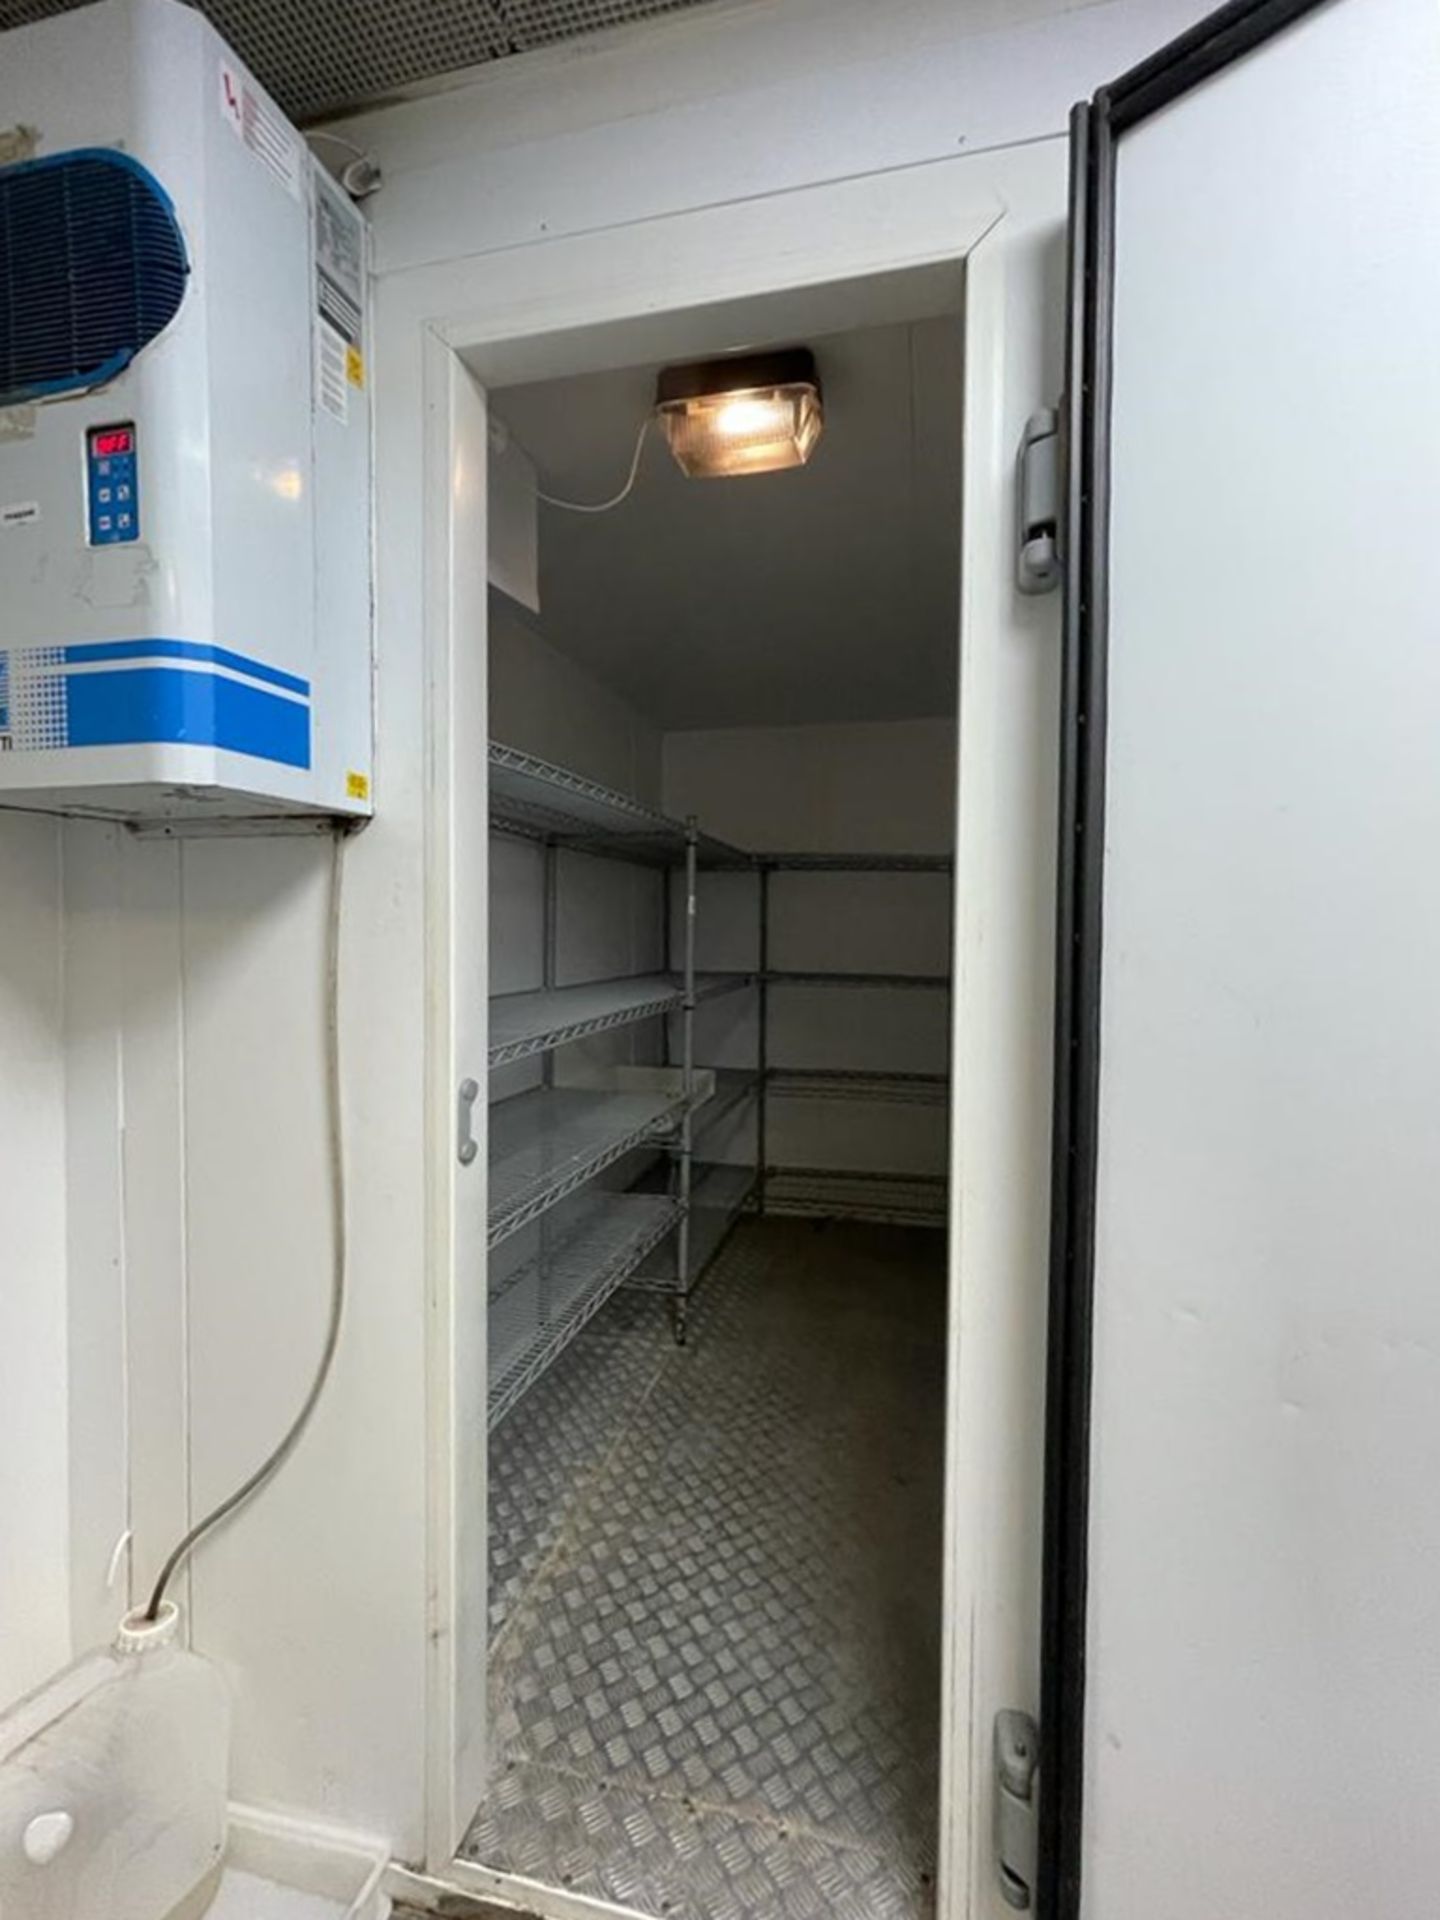 1 x Walk In Refrigerated Cold and Freezer With Zanotti Control Units - Ref: BK249 - CL686 - - Image 16 of 24